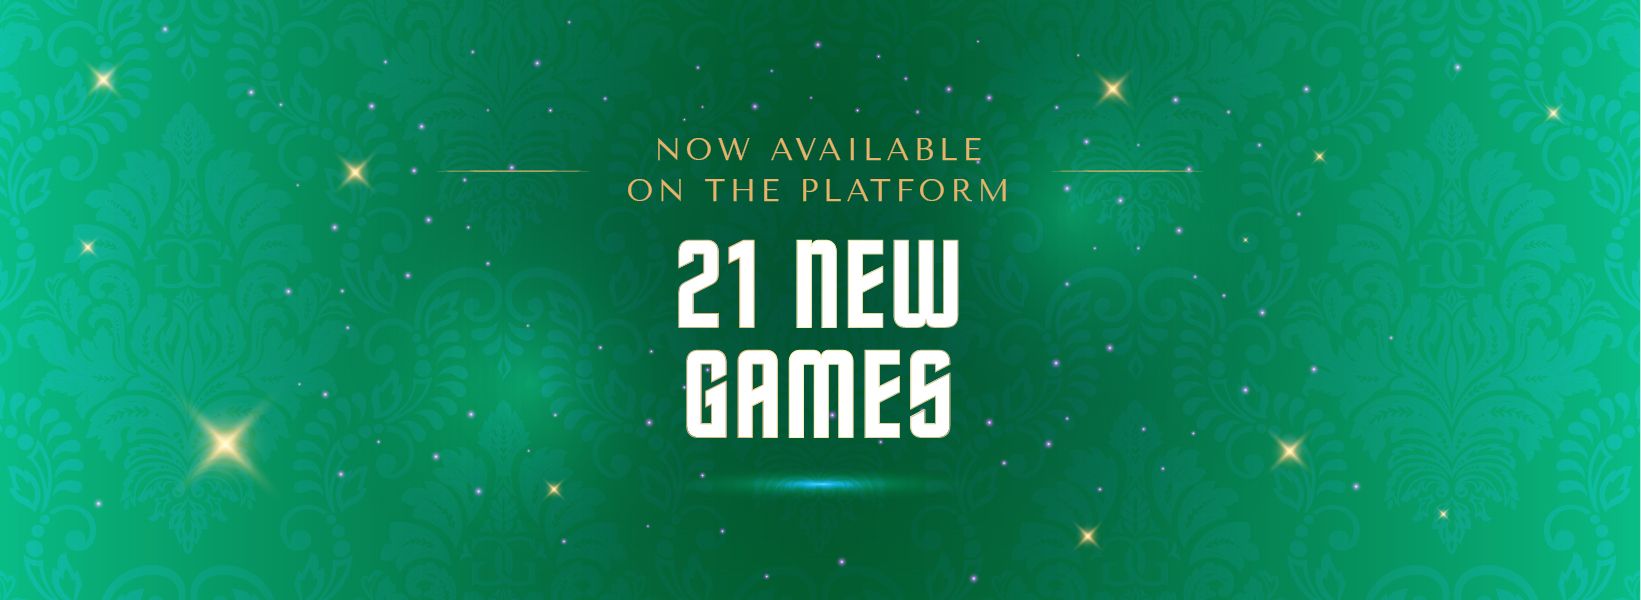 21 new games available now on the platform